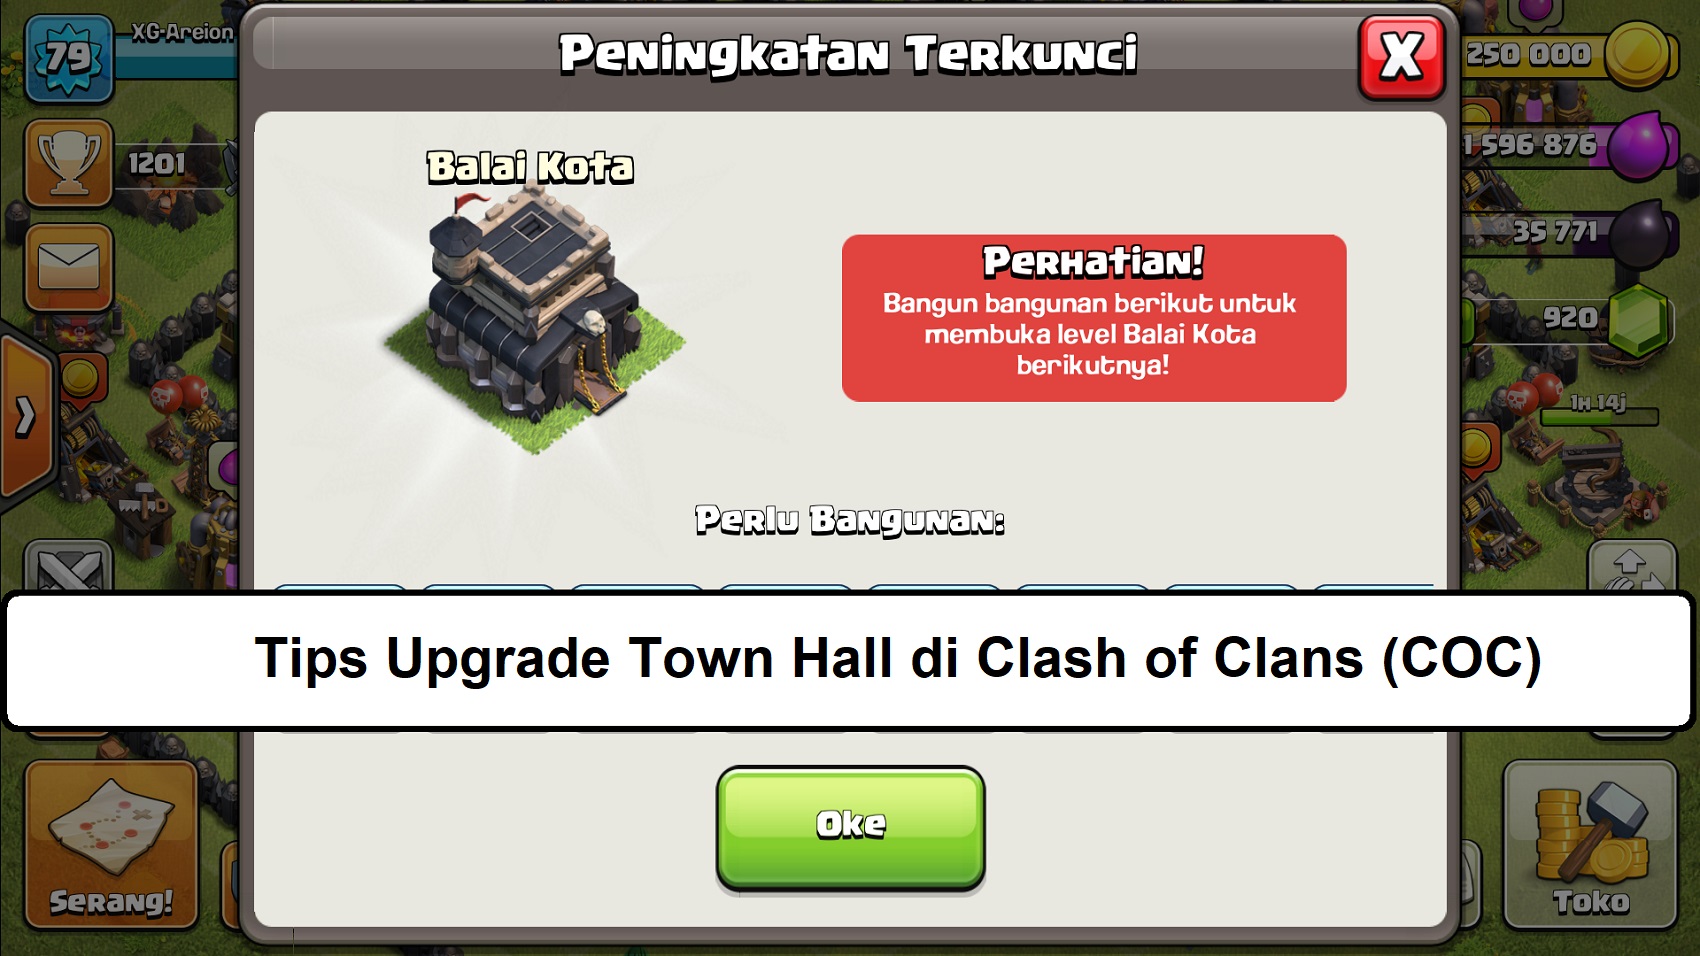 Tips Upgrade Town Hall di Clash of Clans (COC)